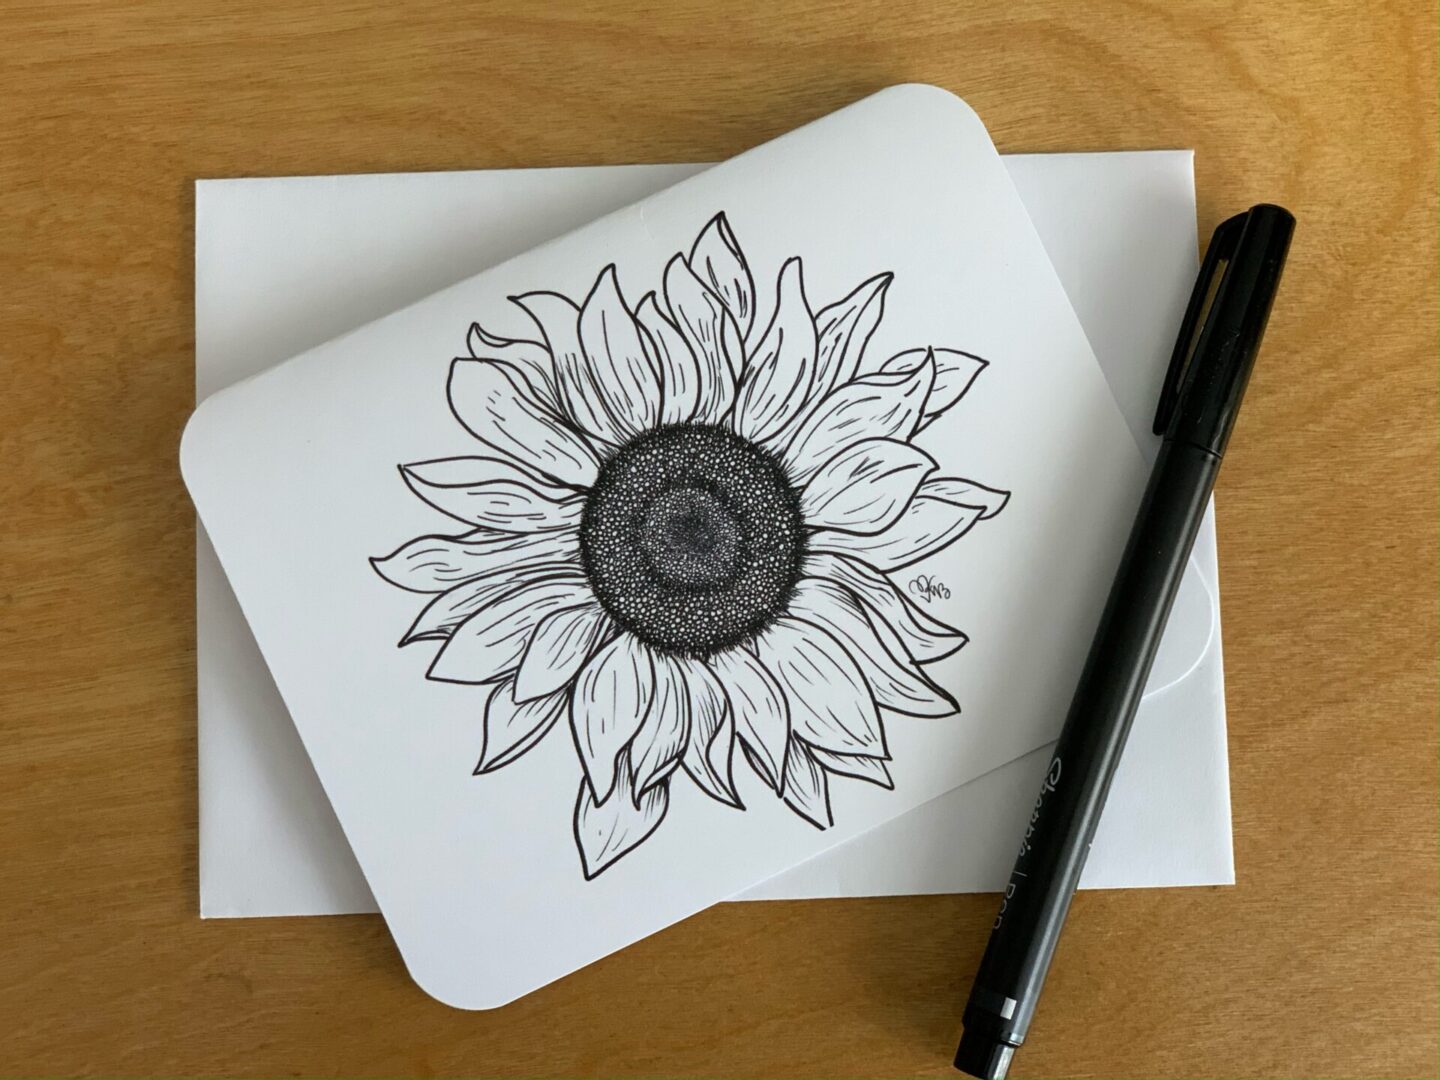 A note card with a sunflower drawing on it.